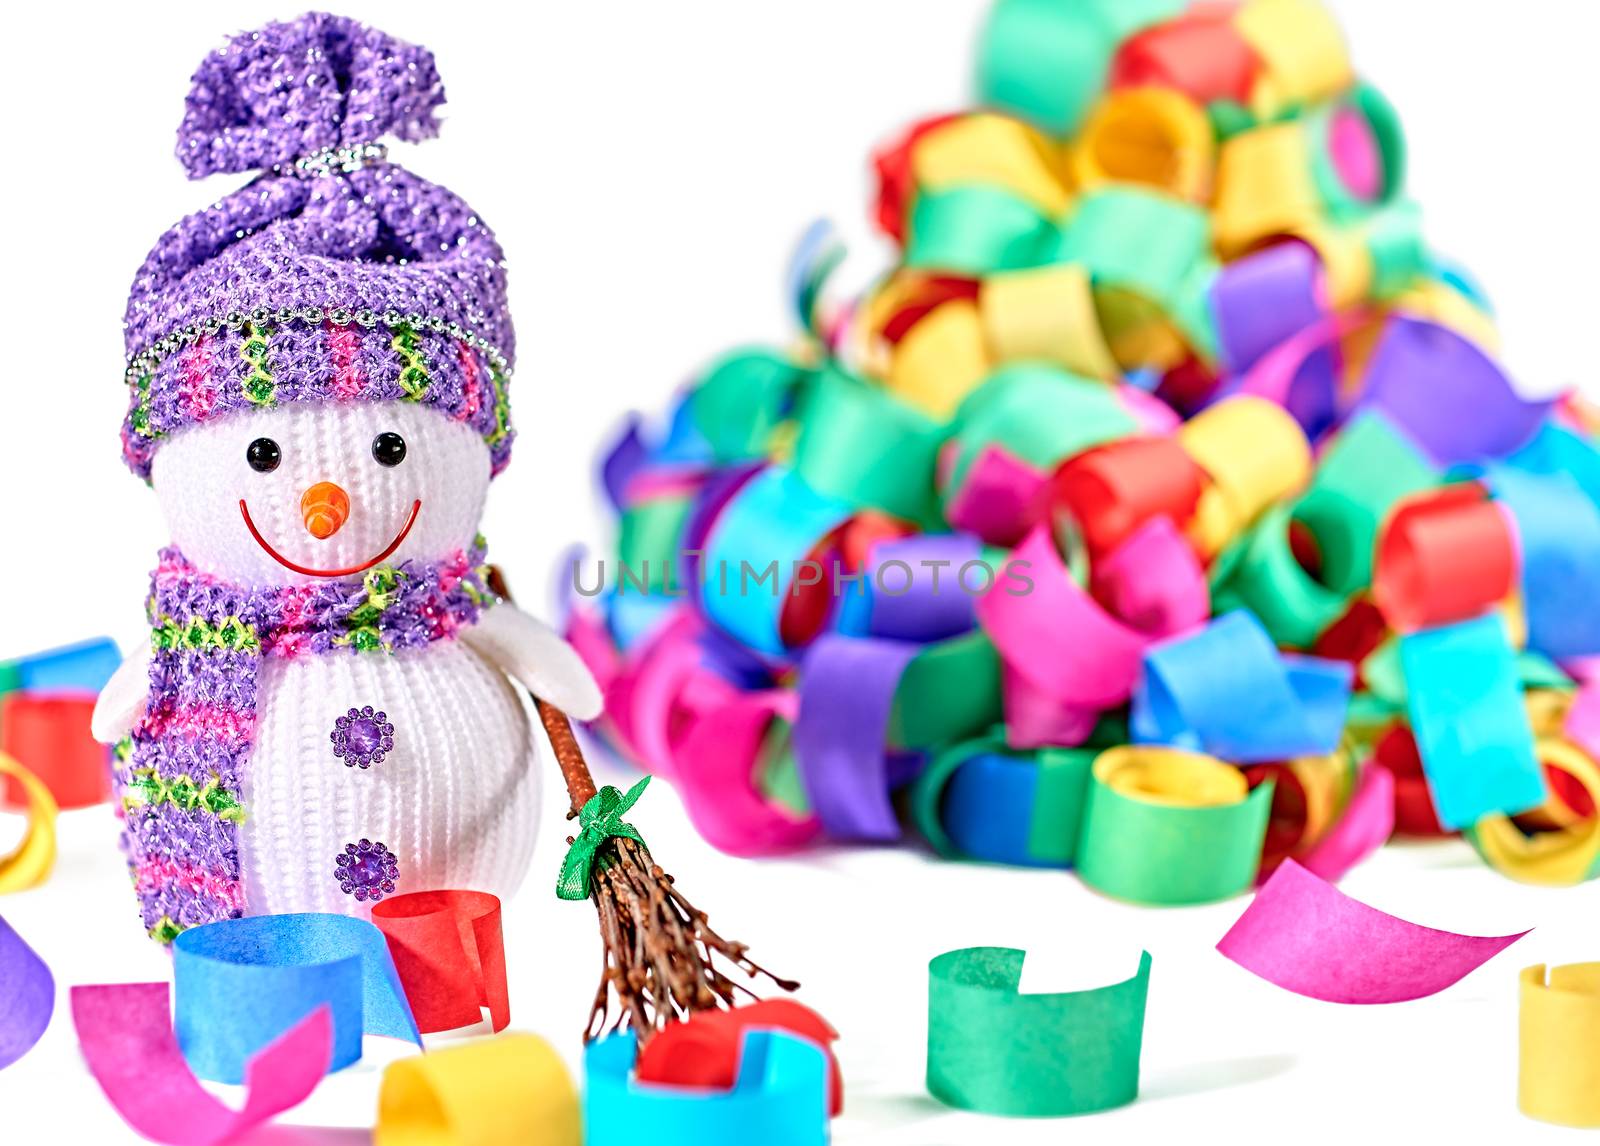 New Year 2016. Happy Snowman. Party decoration multicolored serpentine confetti. Cheerful fun winter holiday on white background, copyspace.Snowman celebration in festive hat, scarf smiling with broom